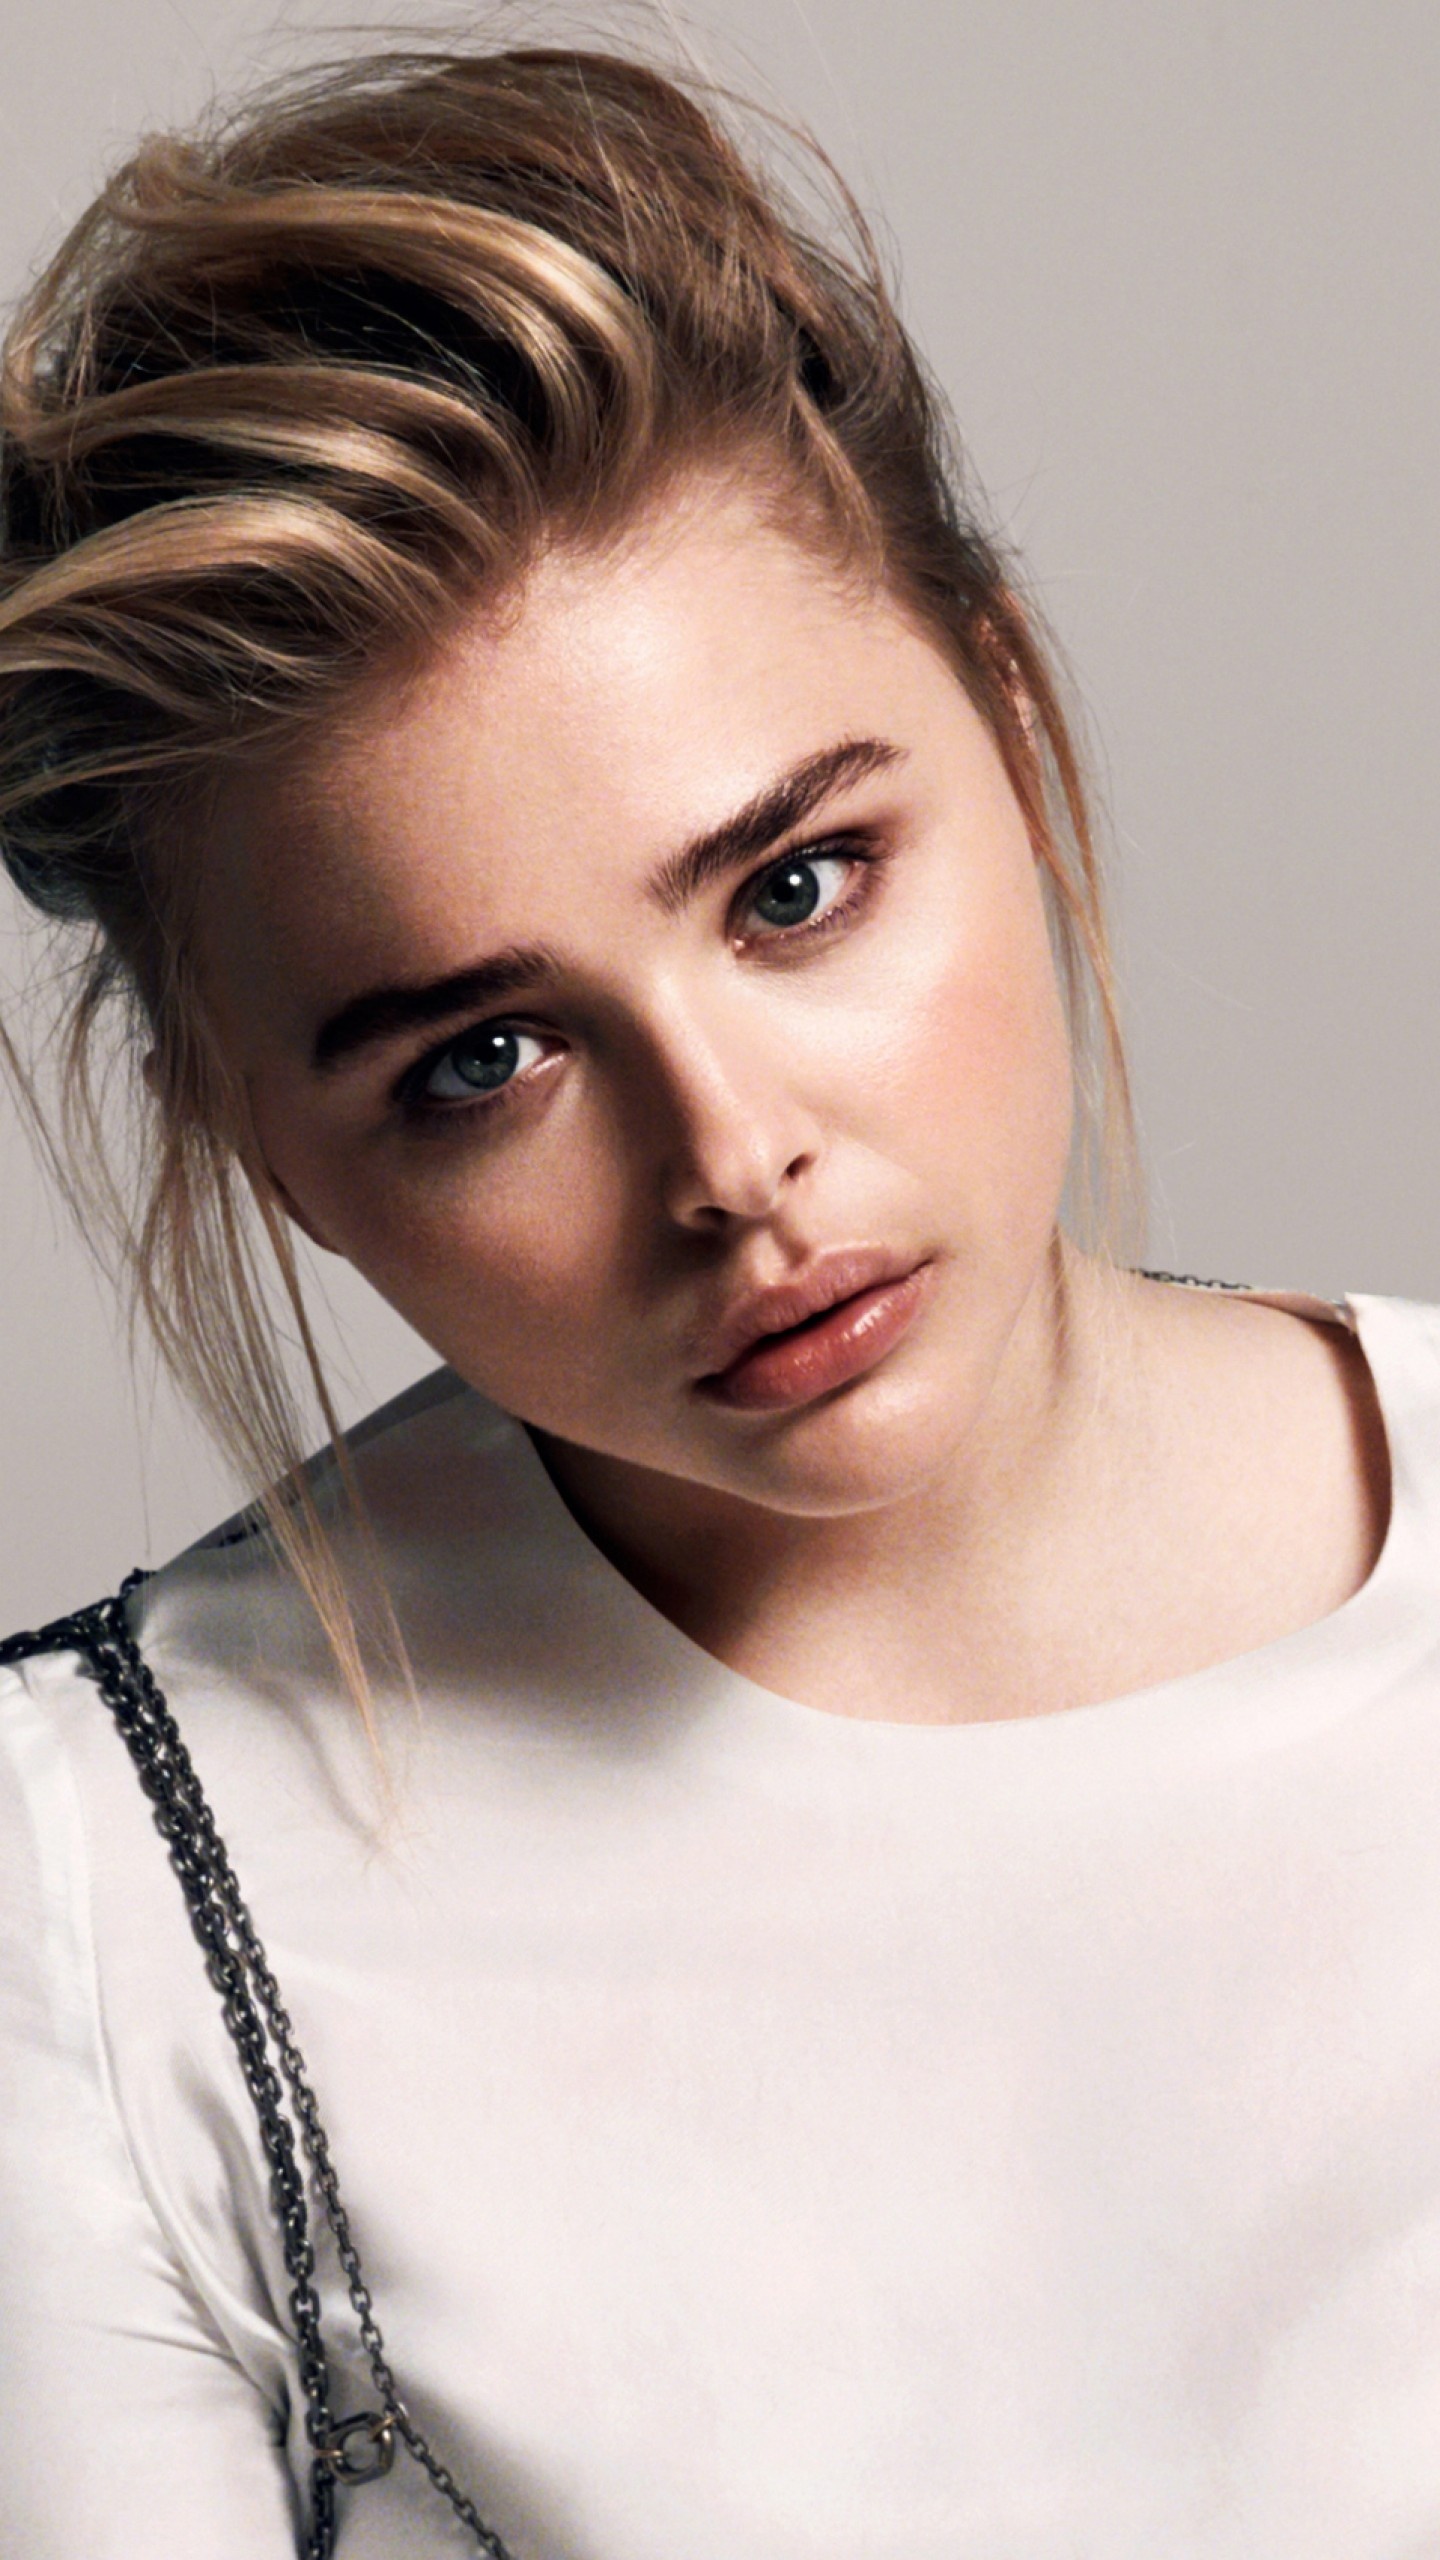 Chloe Moretz: Portrayed Kayla Judith Forester in a 2021 American comedy film, Tom and Jerry. 1440x2560 HD Background.